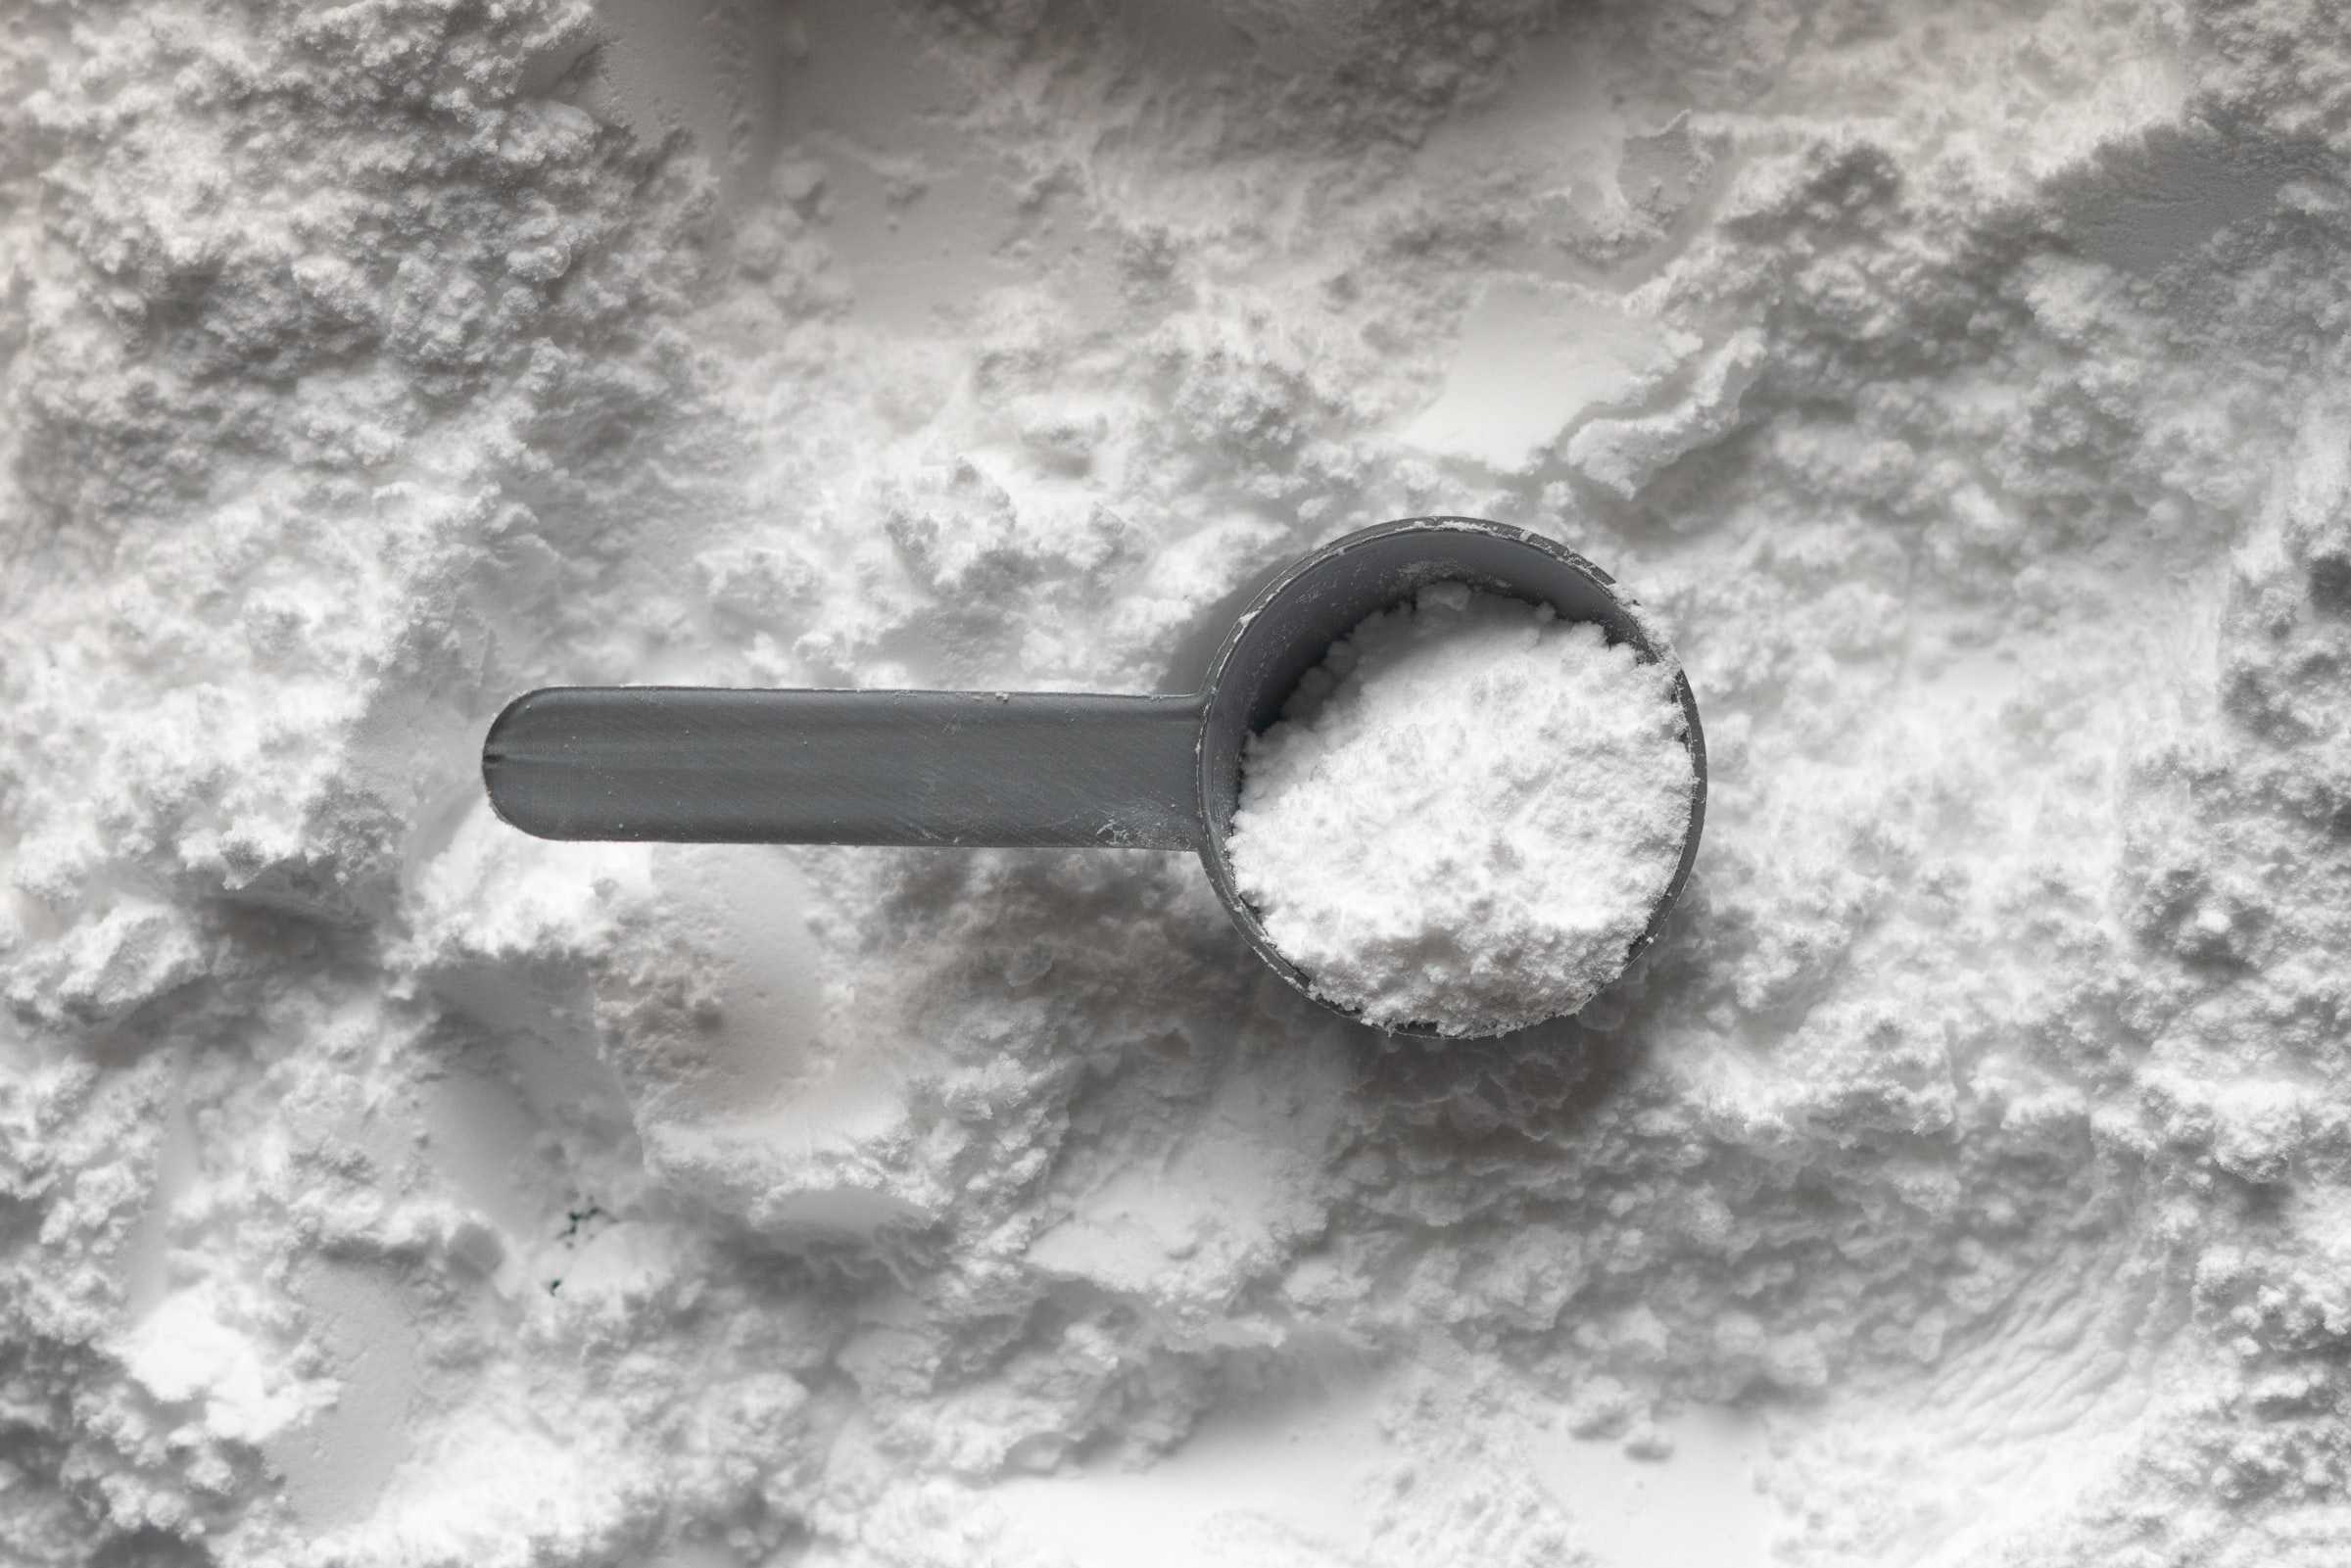 What is the proper way to take creatine?